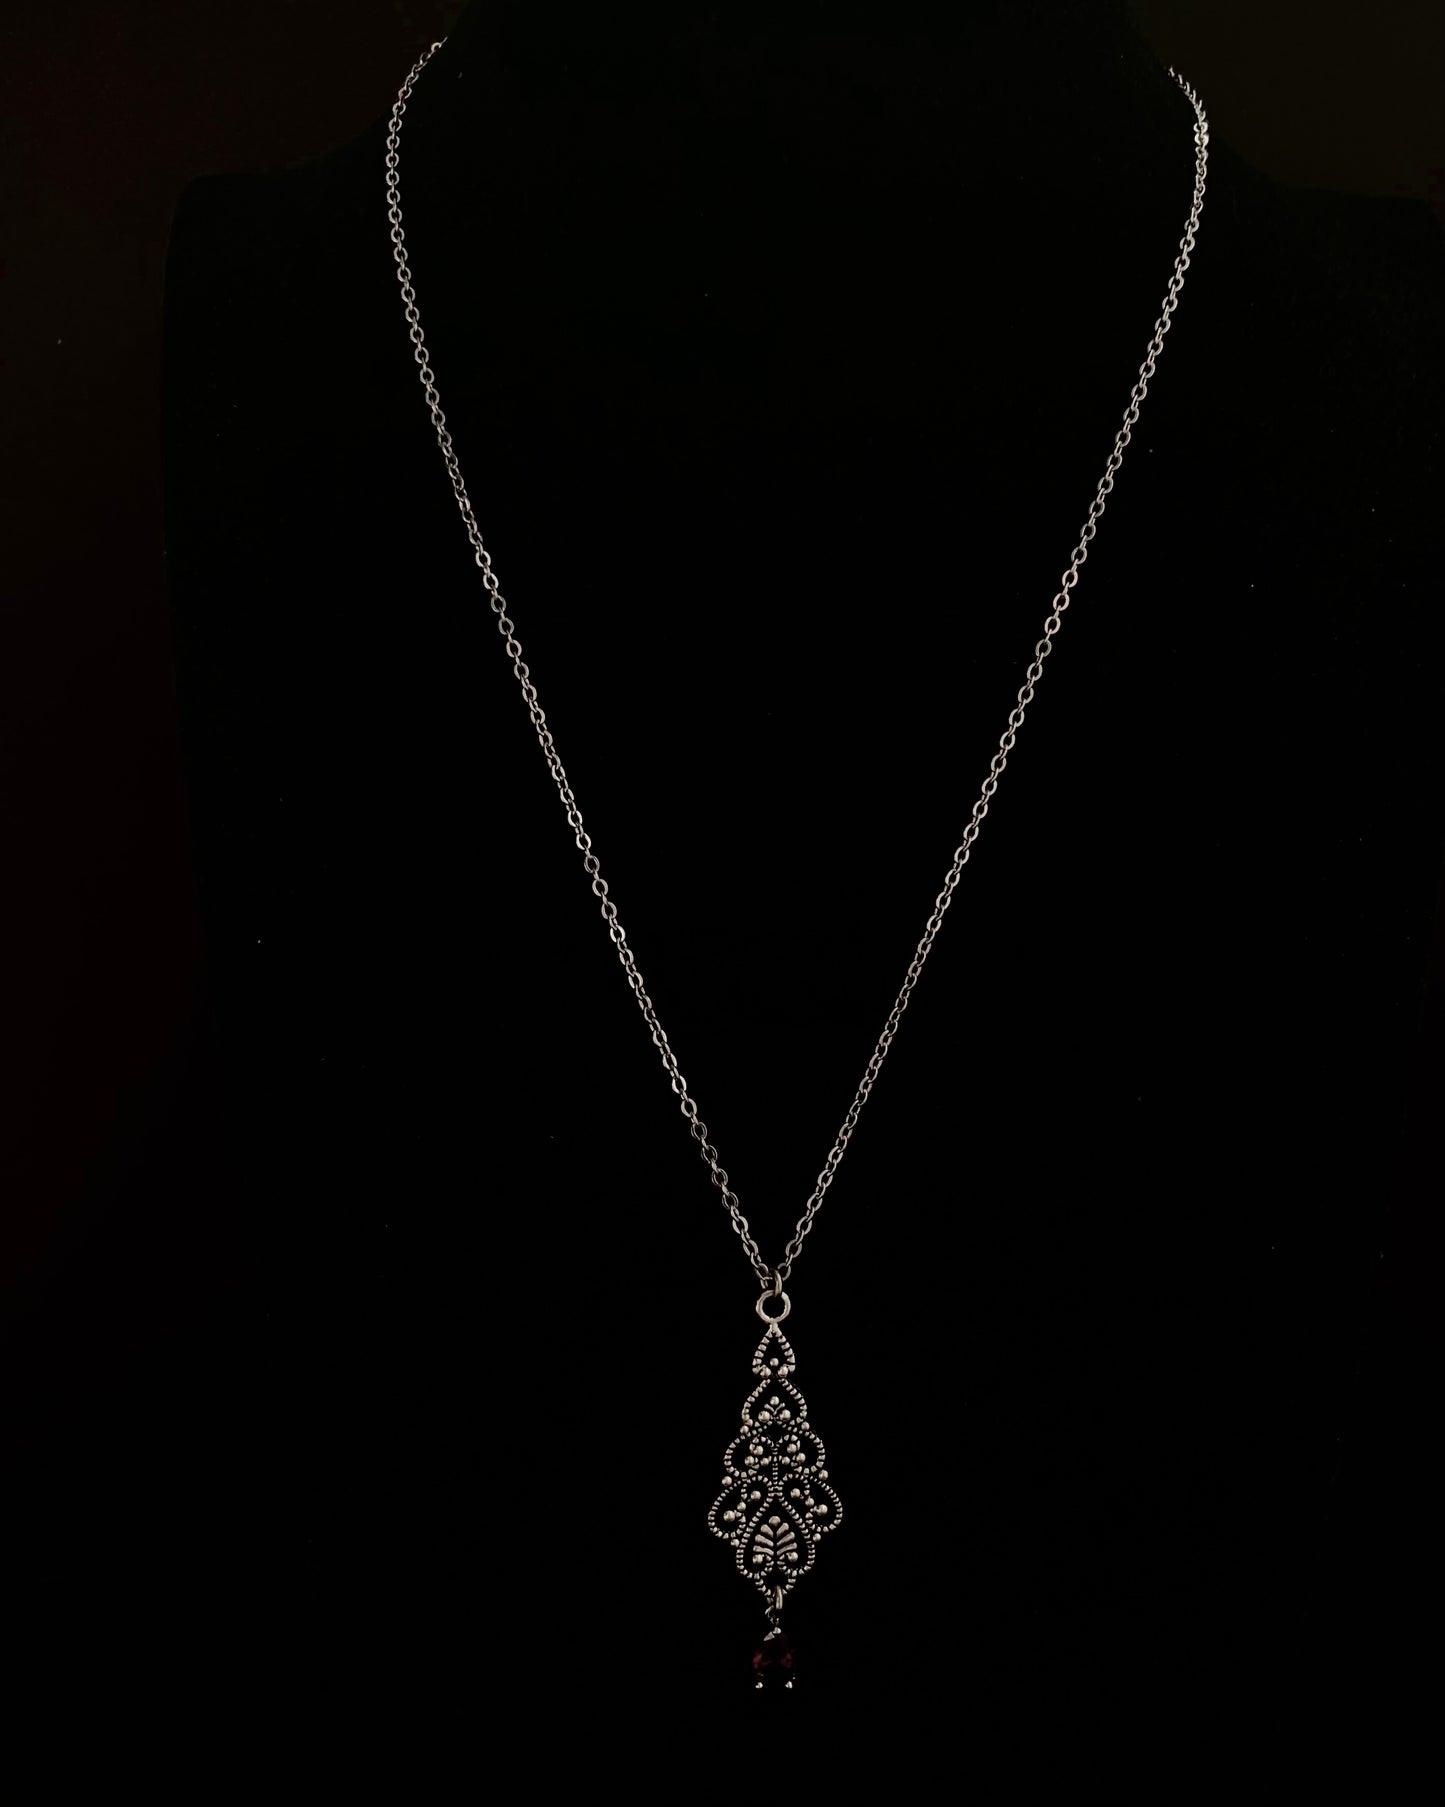 Silent Cry necklace